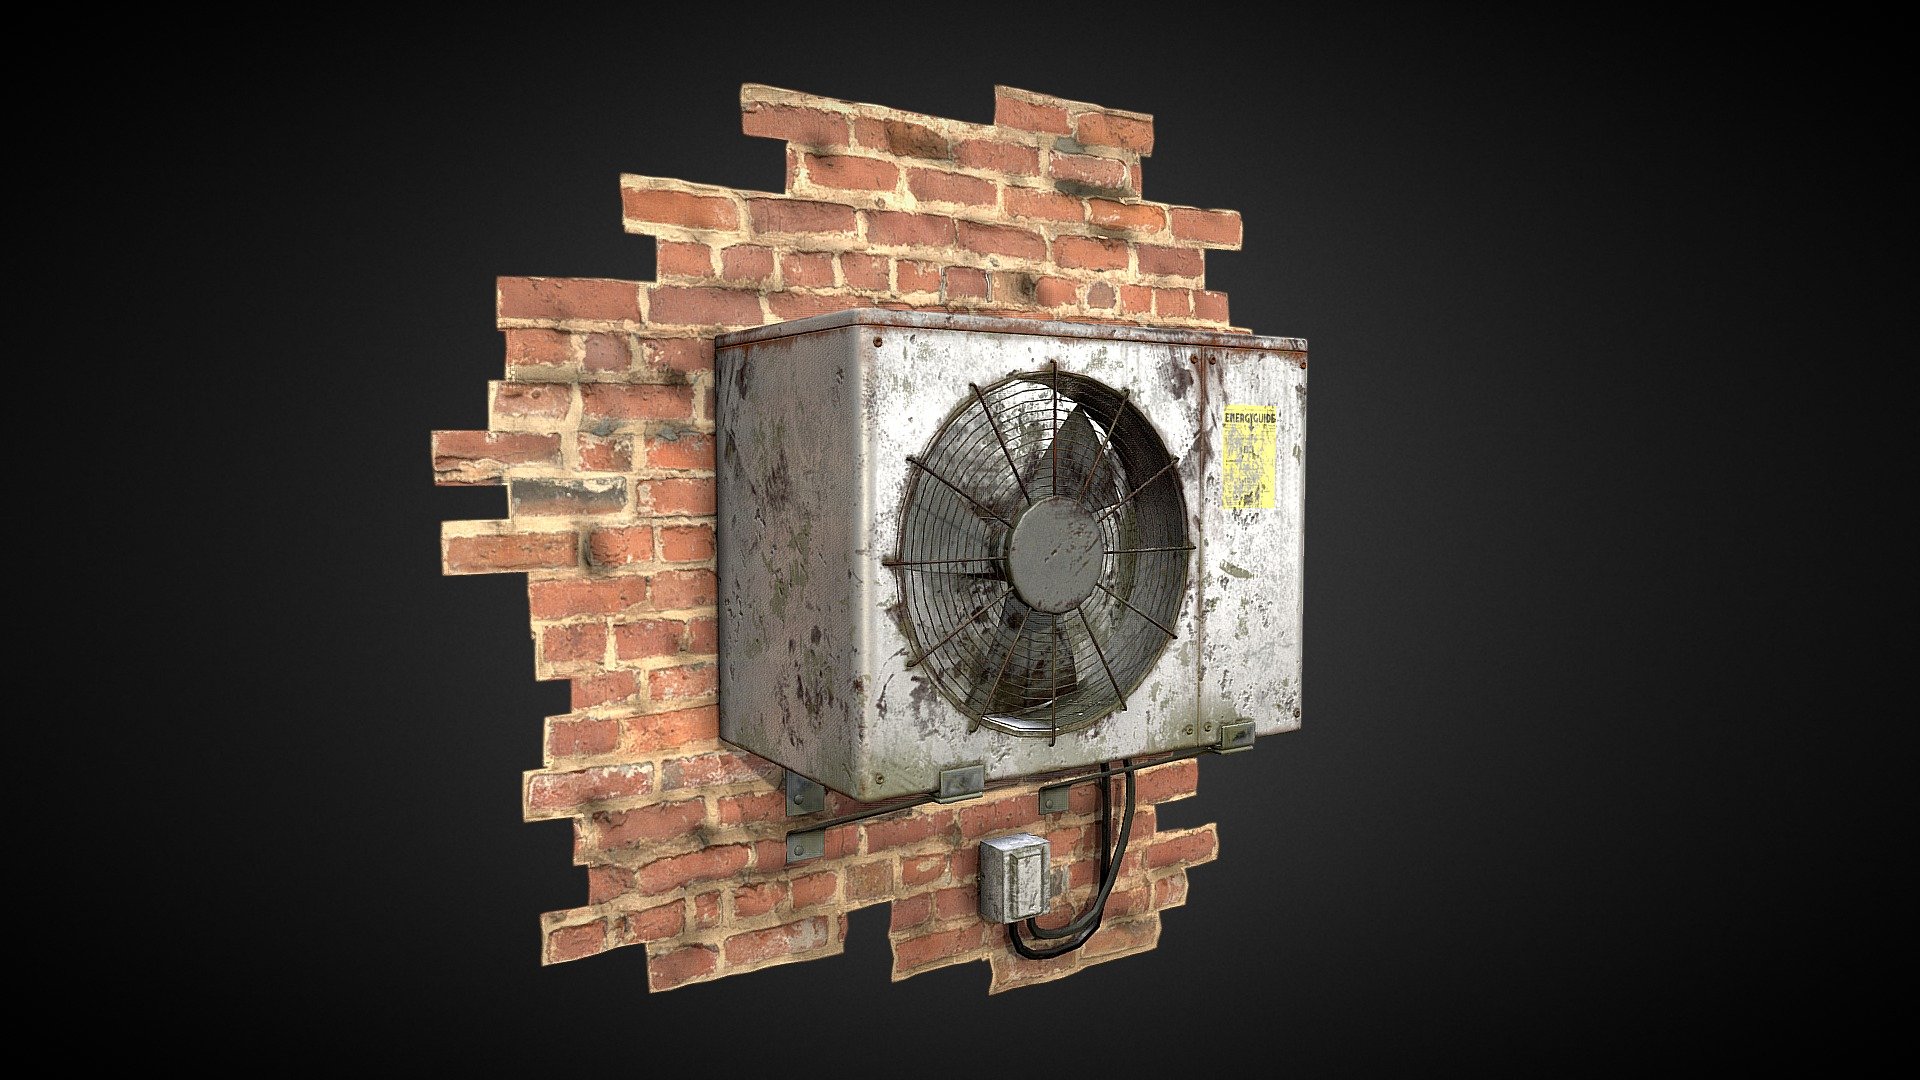 AC game asset with 4K PBR textures maps by 13Particles.
Responsible For PBR texturing &amp; Presentation.

For more artworks and updates follow us on:-

Instagram:- https://www.instagram.com/13particles/

Artstation:- https://thirteenparticles.artstation.com

Twitter:- https://twitter.com/13Particles

Facebook:- https://www.facebook.com/13Particles/

Linkedin:- https://www.linkedin.com/company/13particles - Texturing Game Asset - 3D model by 13 Particles (@13particles) 3d model